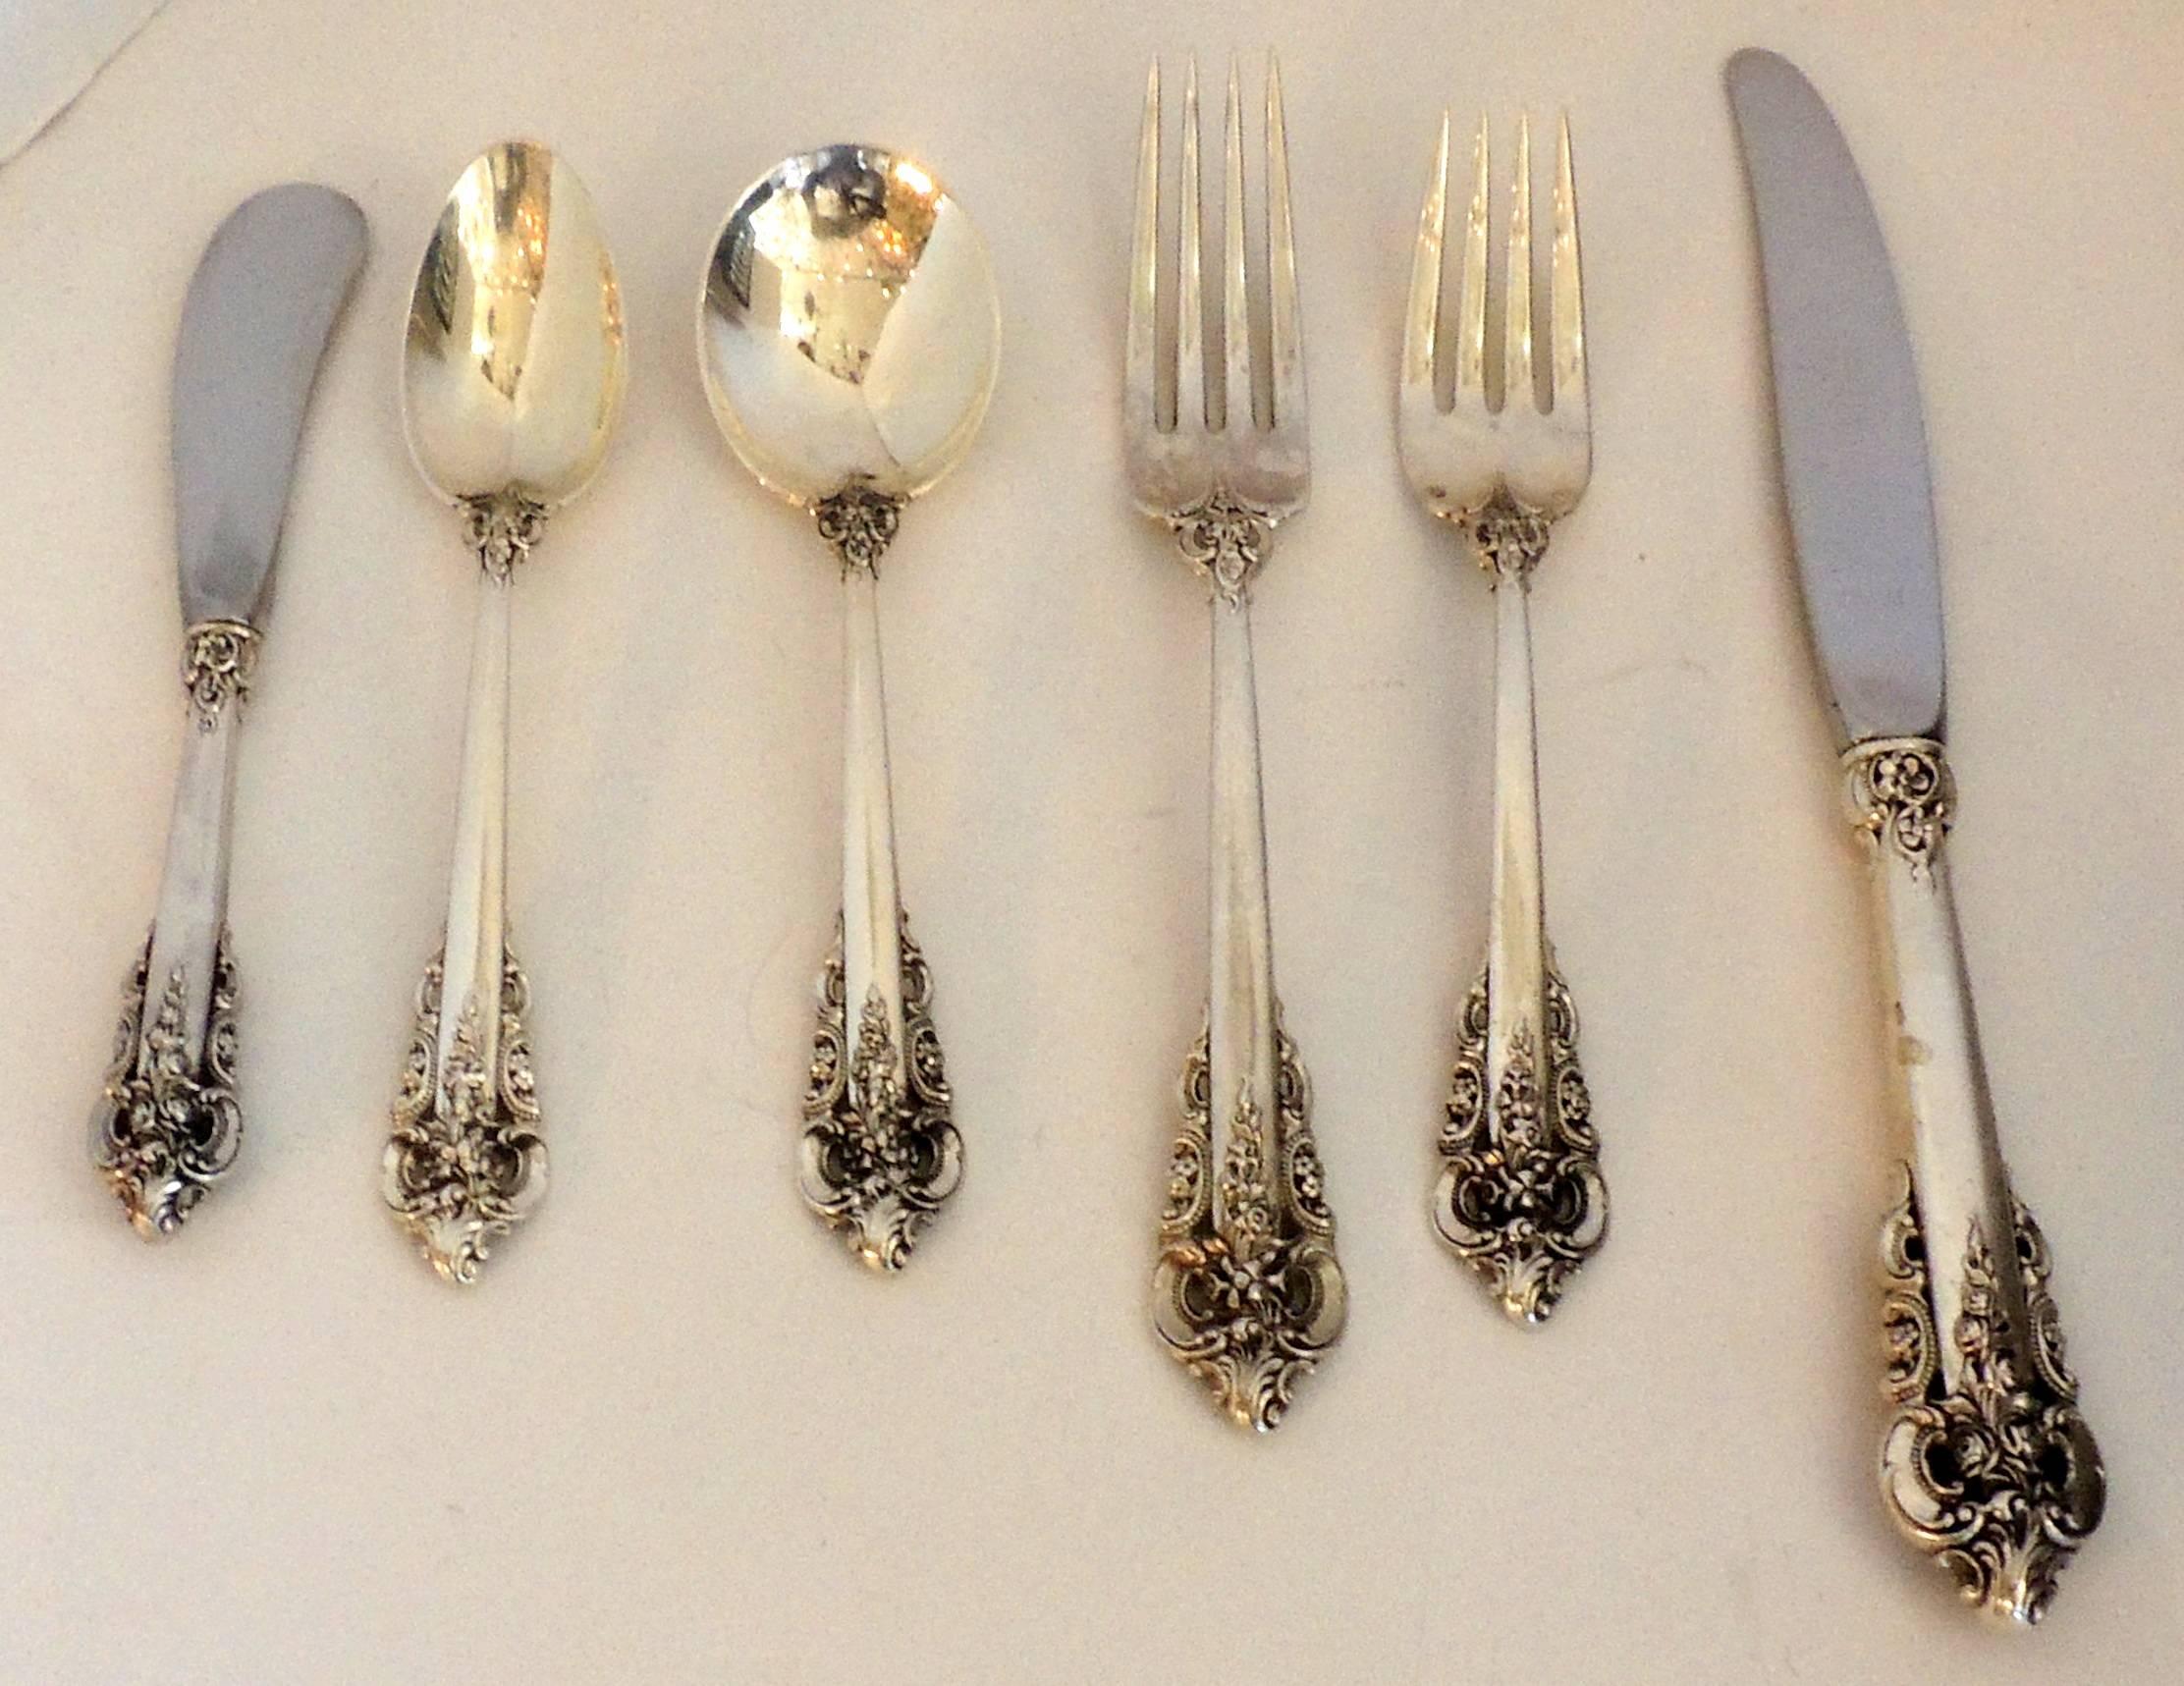 A wonderful set of Wallace sterling silver flatware eight place settings of grande baroque pattern with a total of 48 pieces and no monogram.
Set consisting of:
9